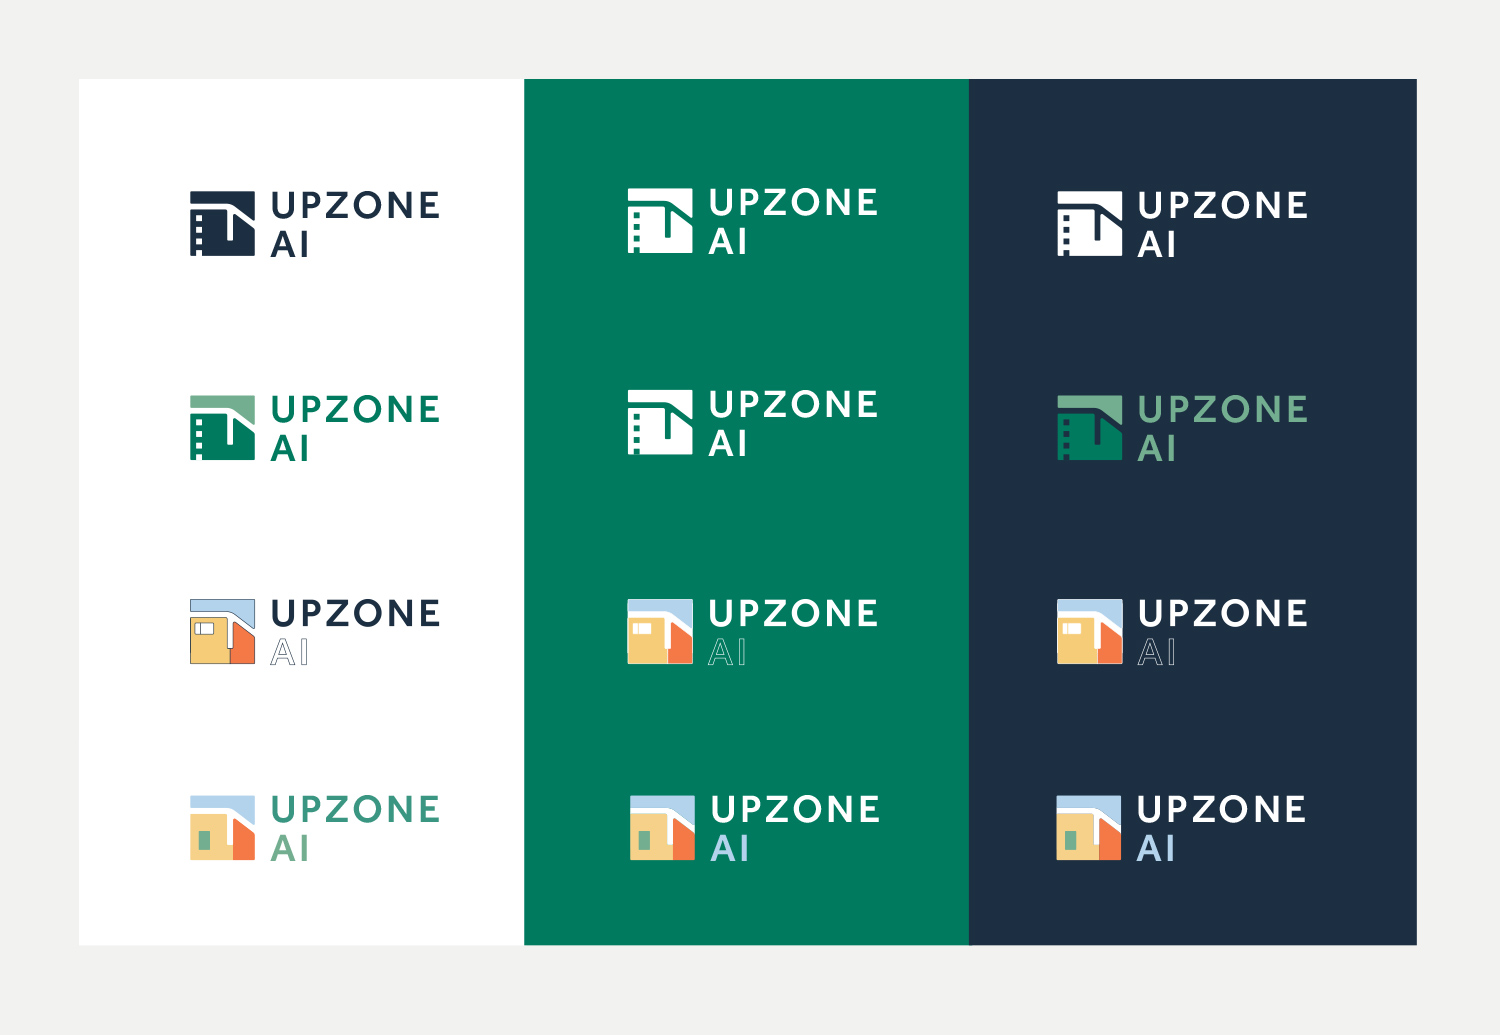 A set of similar logos for an artificial intelligence and proptech startup exploring different versions of the city block map icon and color choices